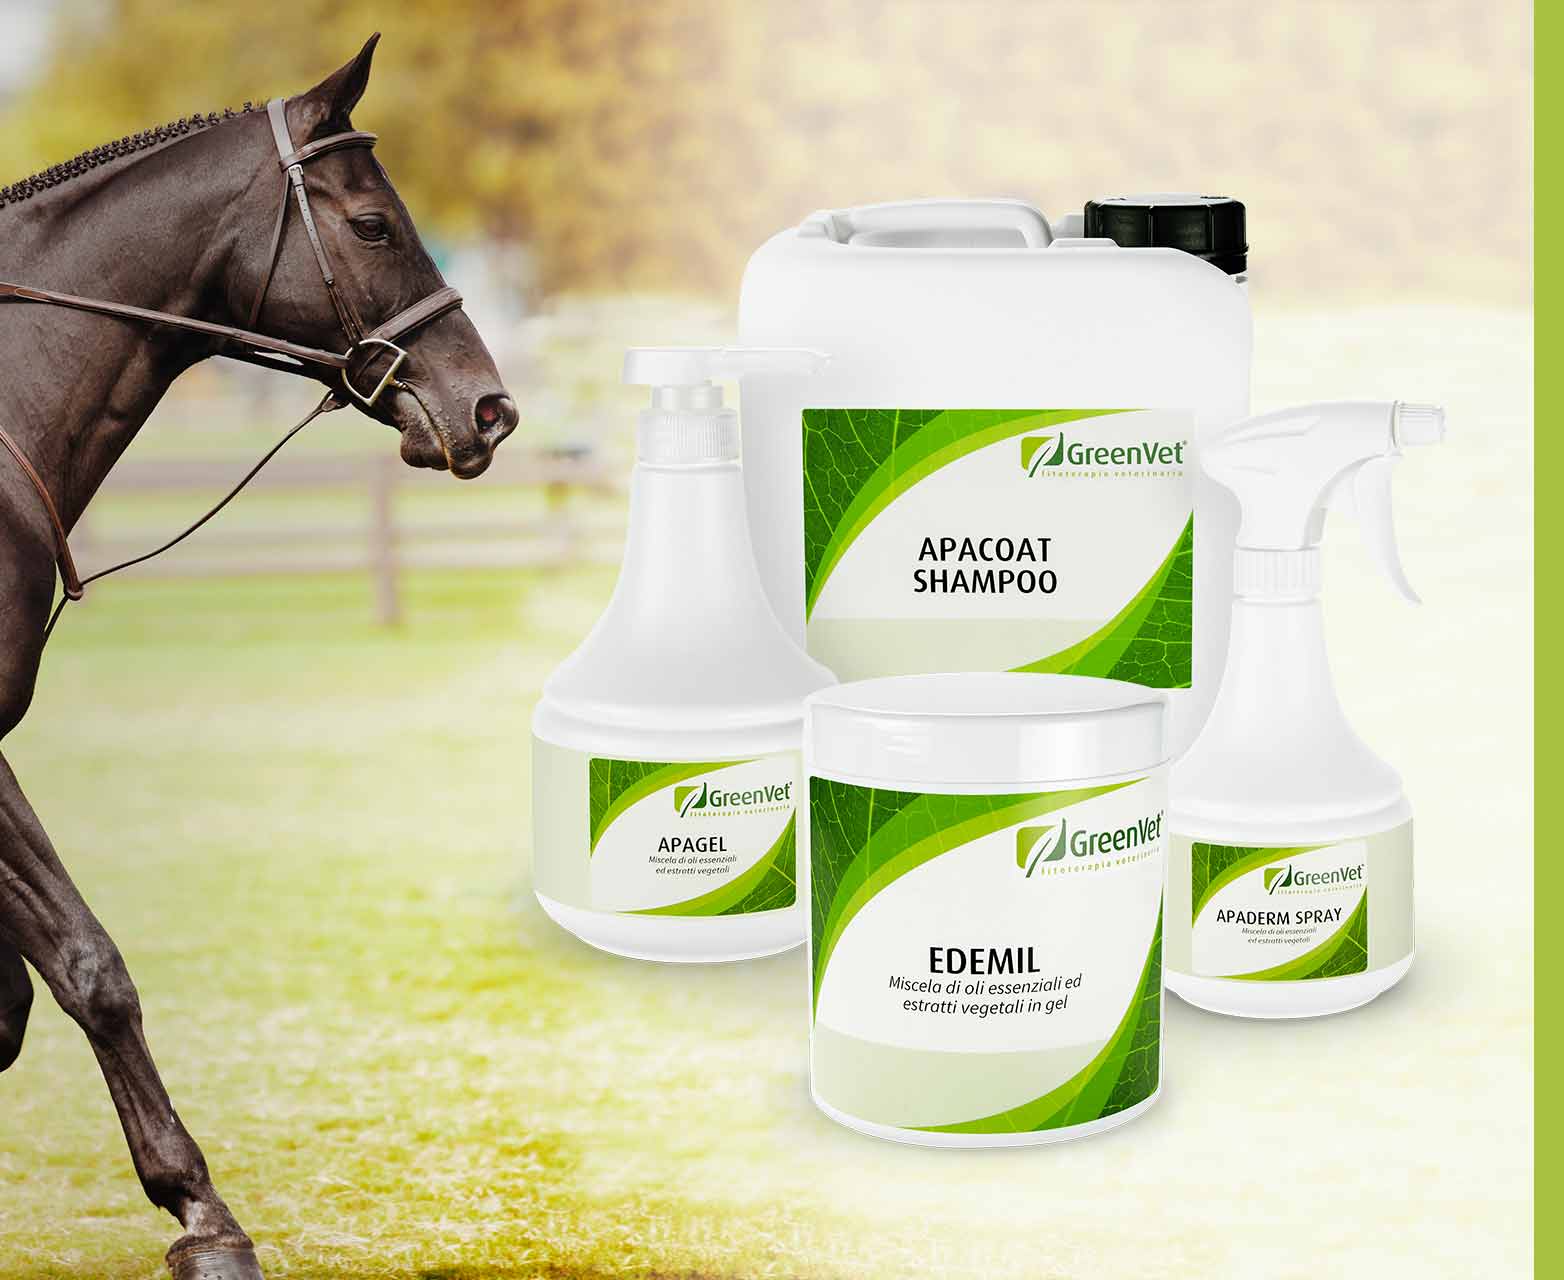 greenvet topical use products for equines